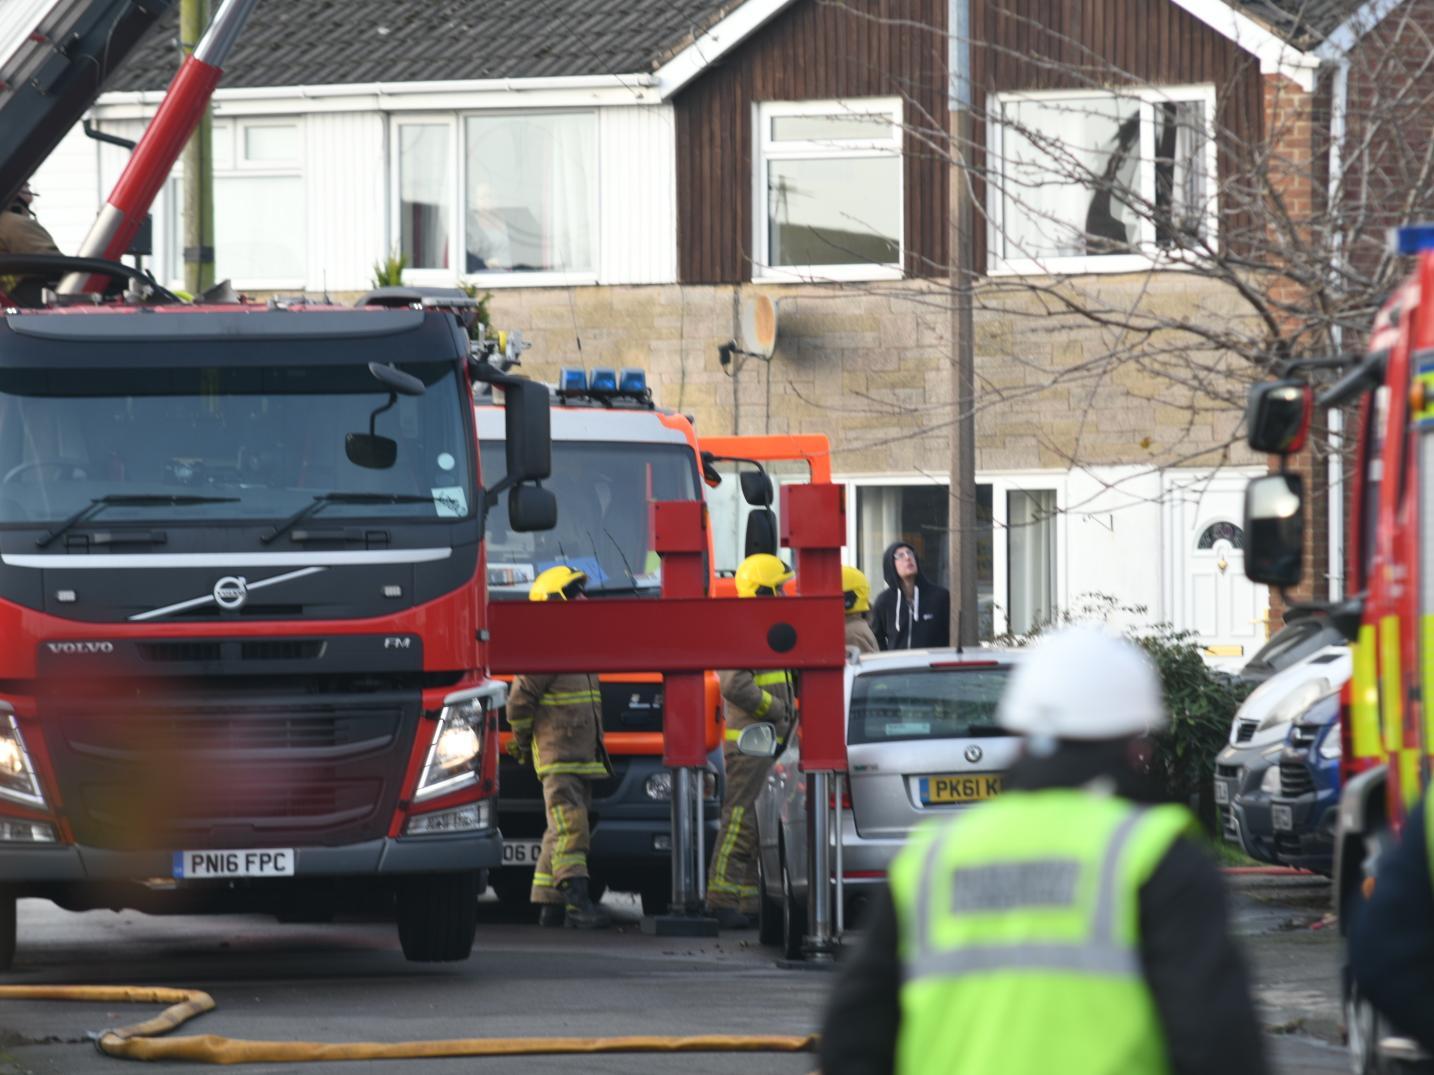 Fire crews were able to prevent the fire from spreading to the semi-detached home next door